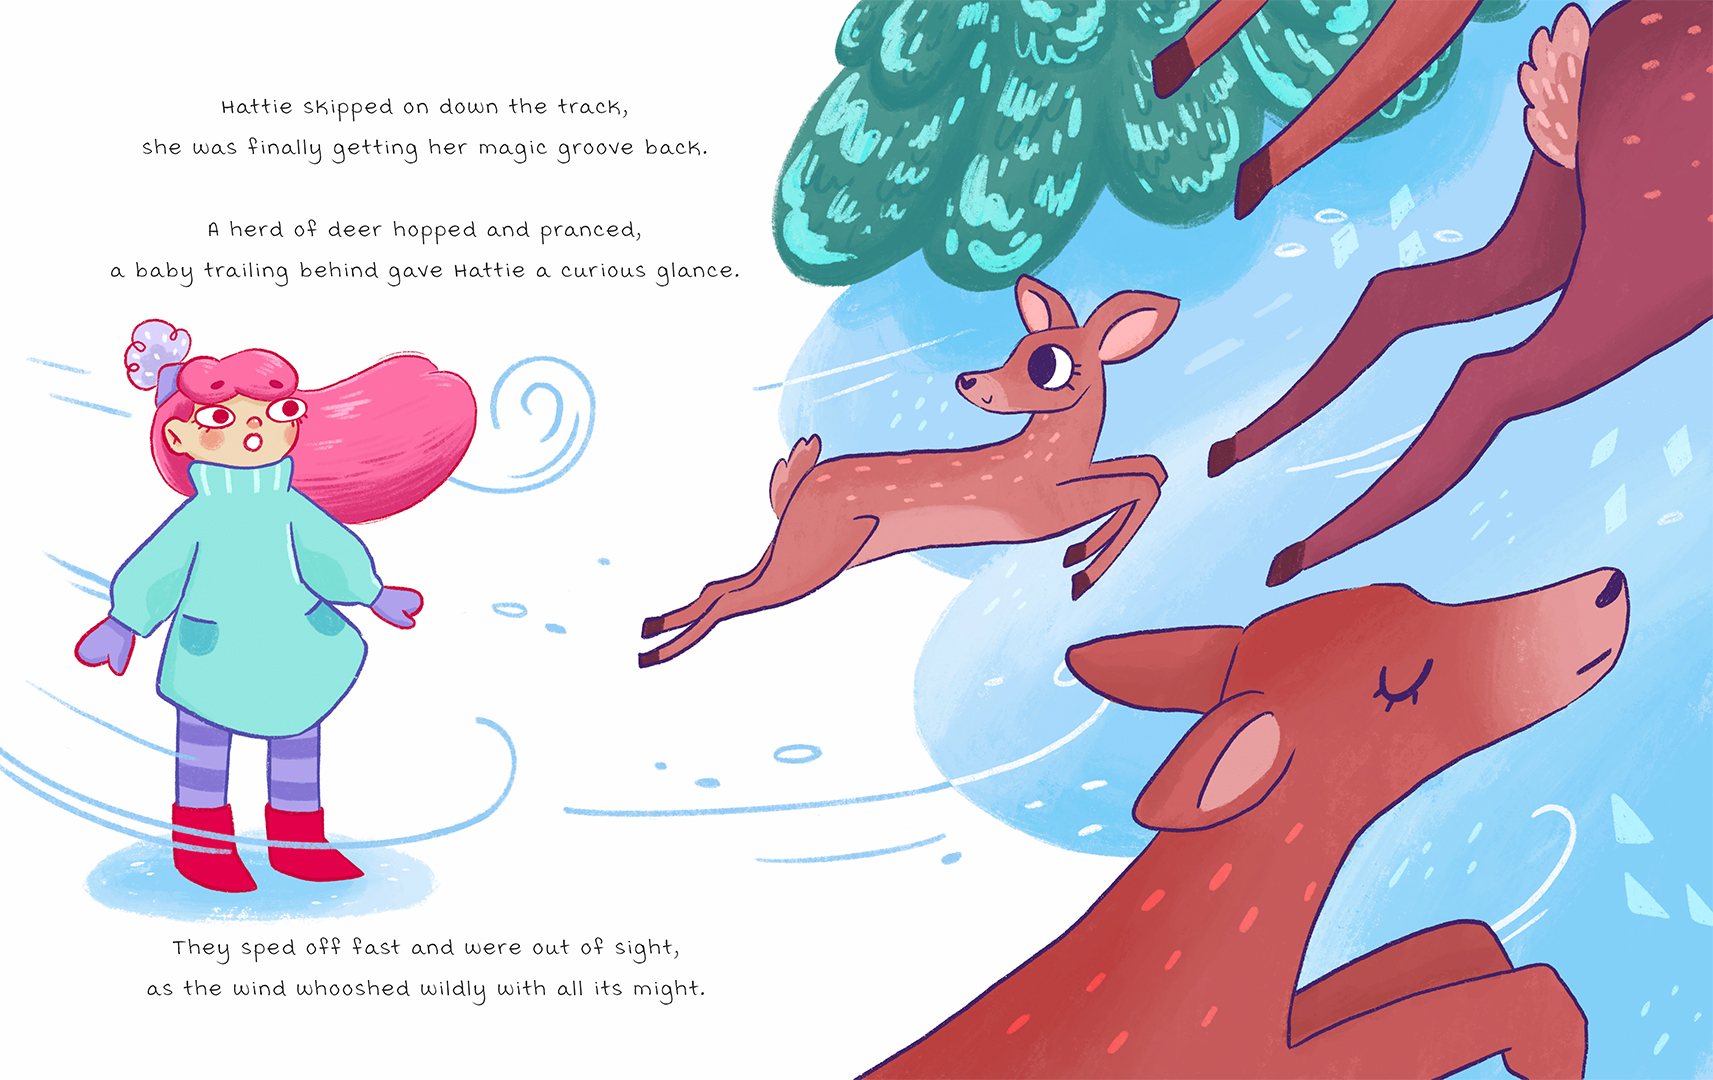 The Confidence Trick – Pages 21-22. A herd of Deer whoosh past Hattie.